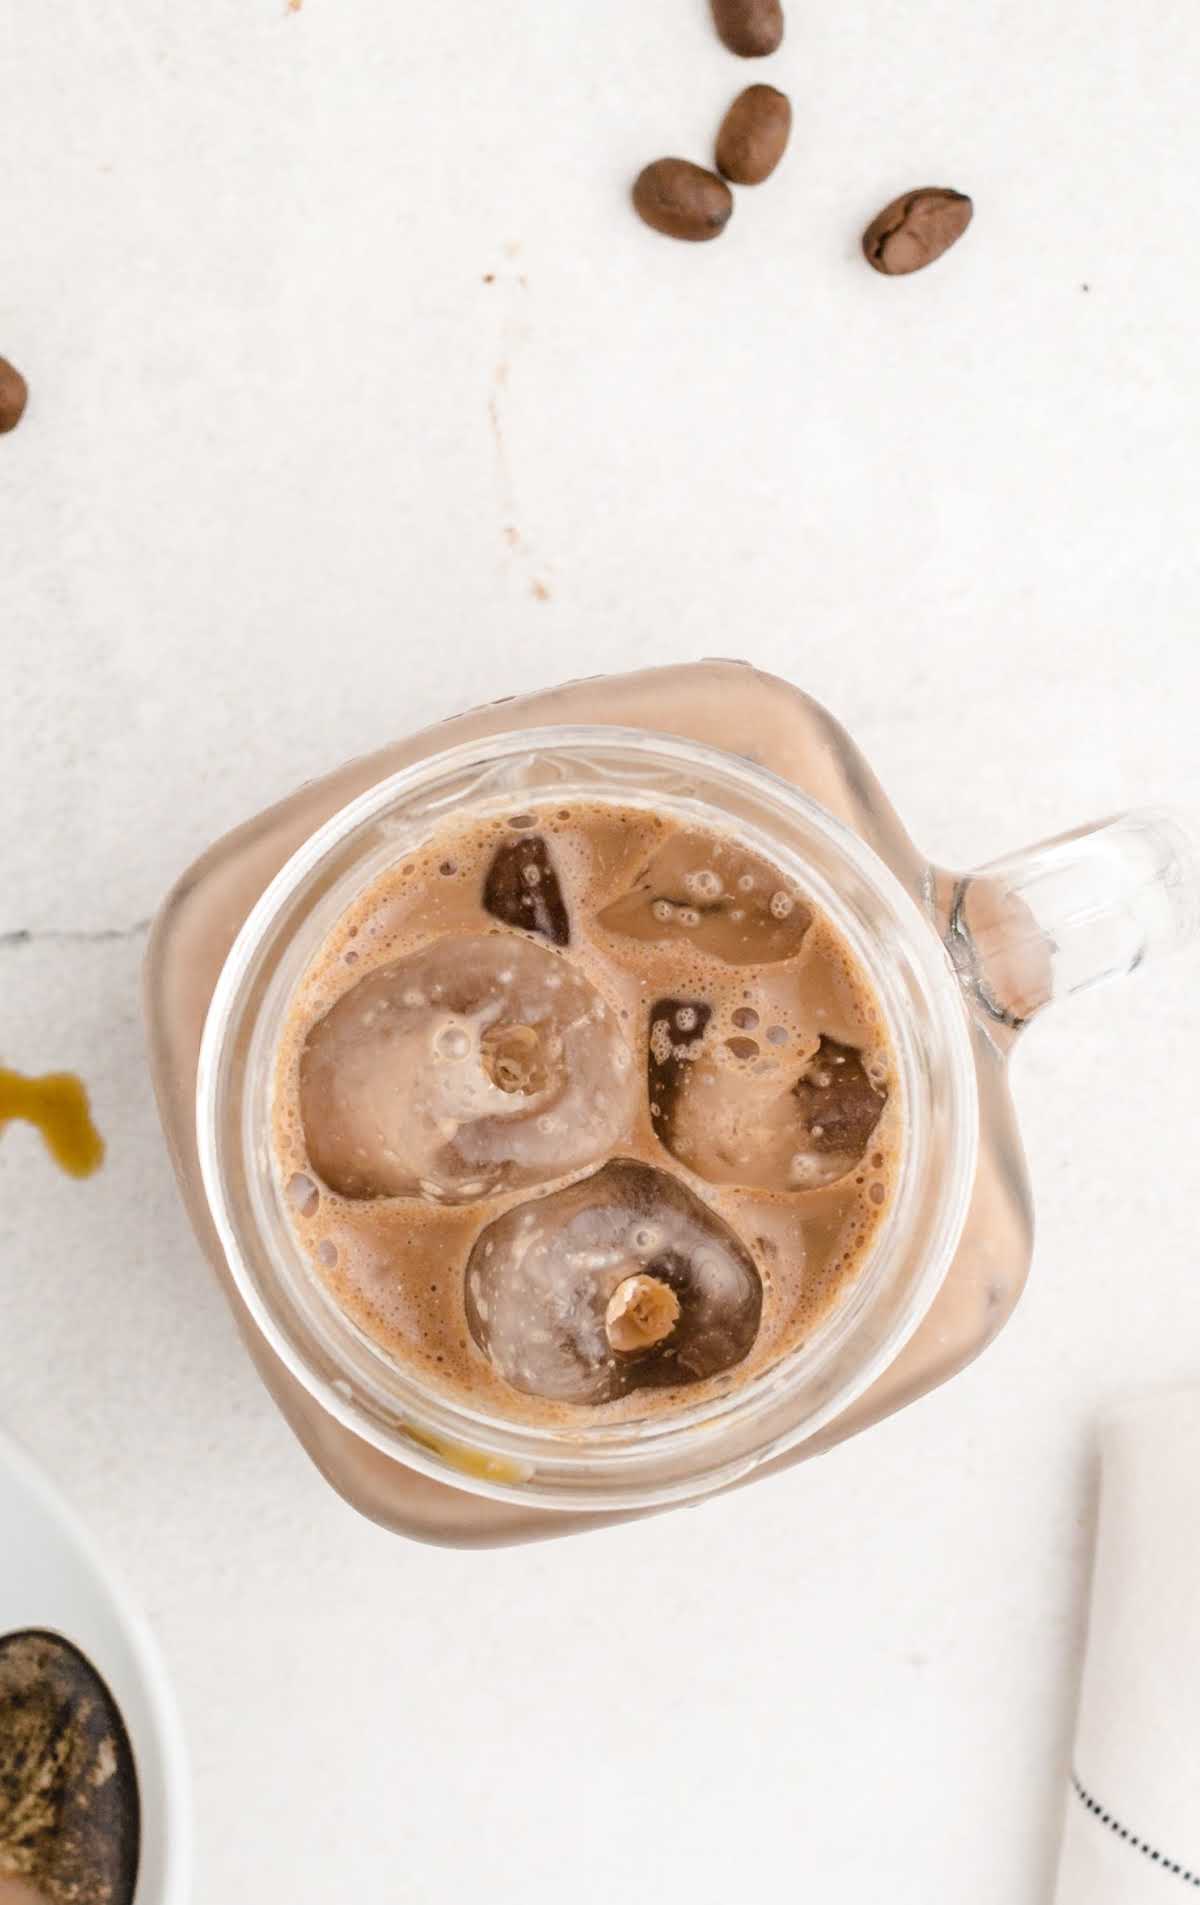 A cup of coffee, with Iced mocha